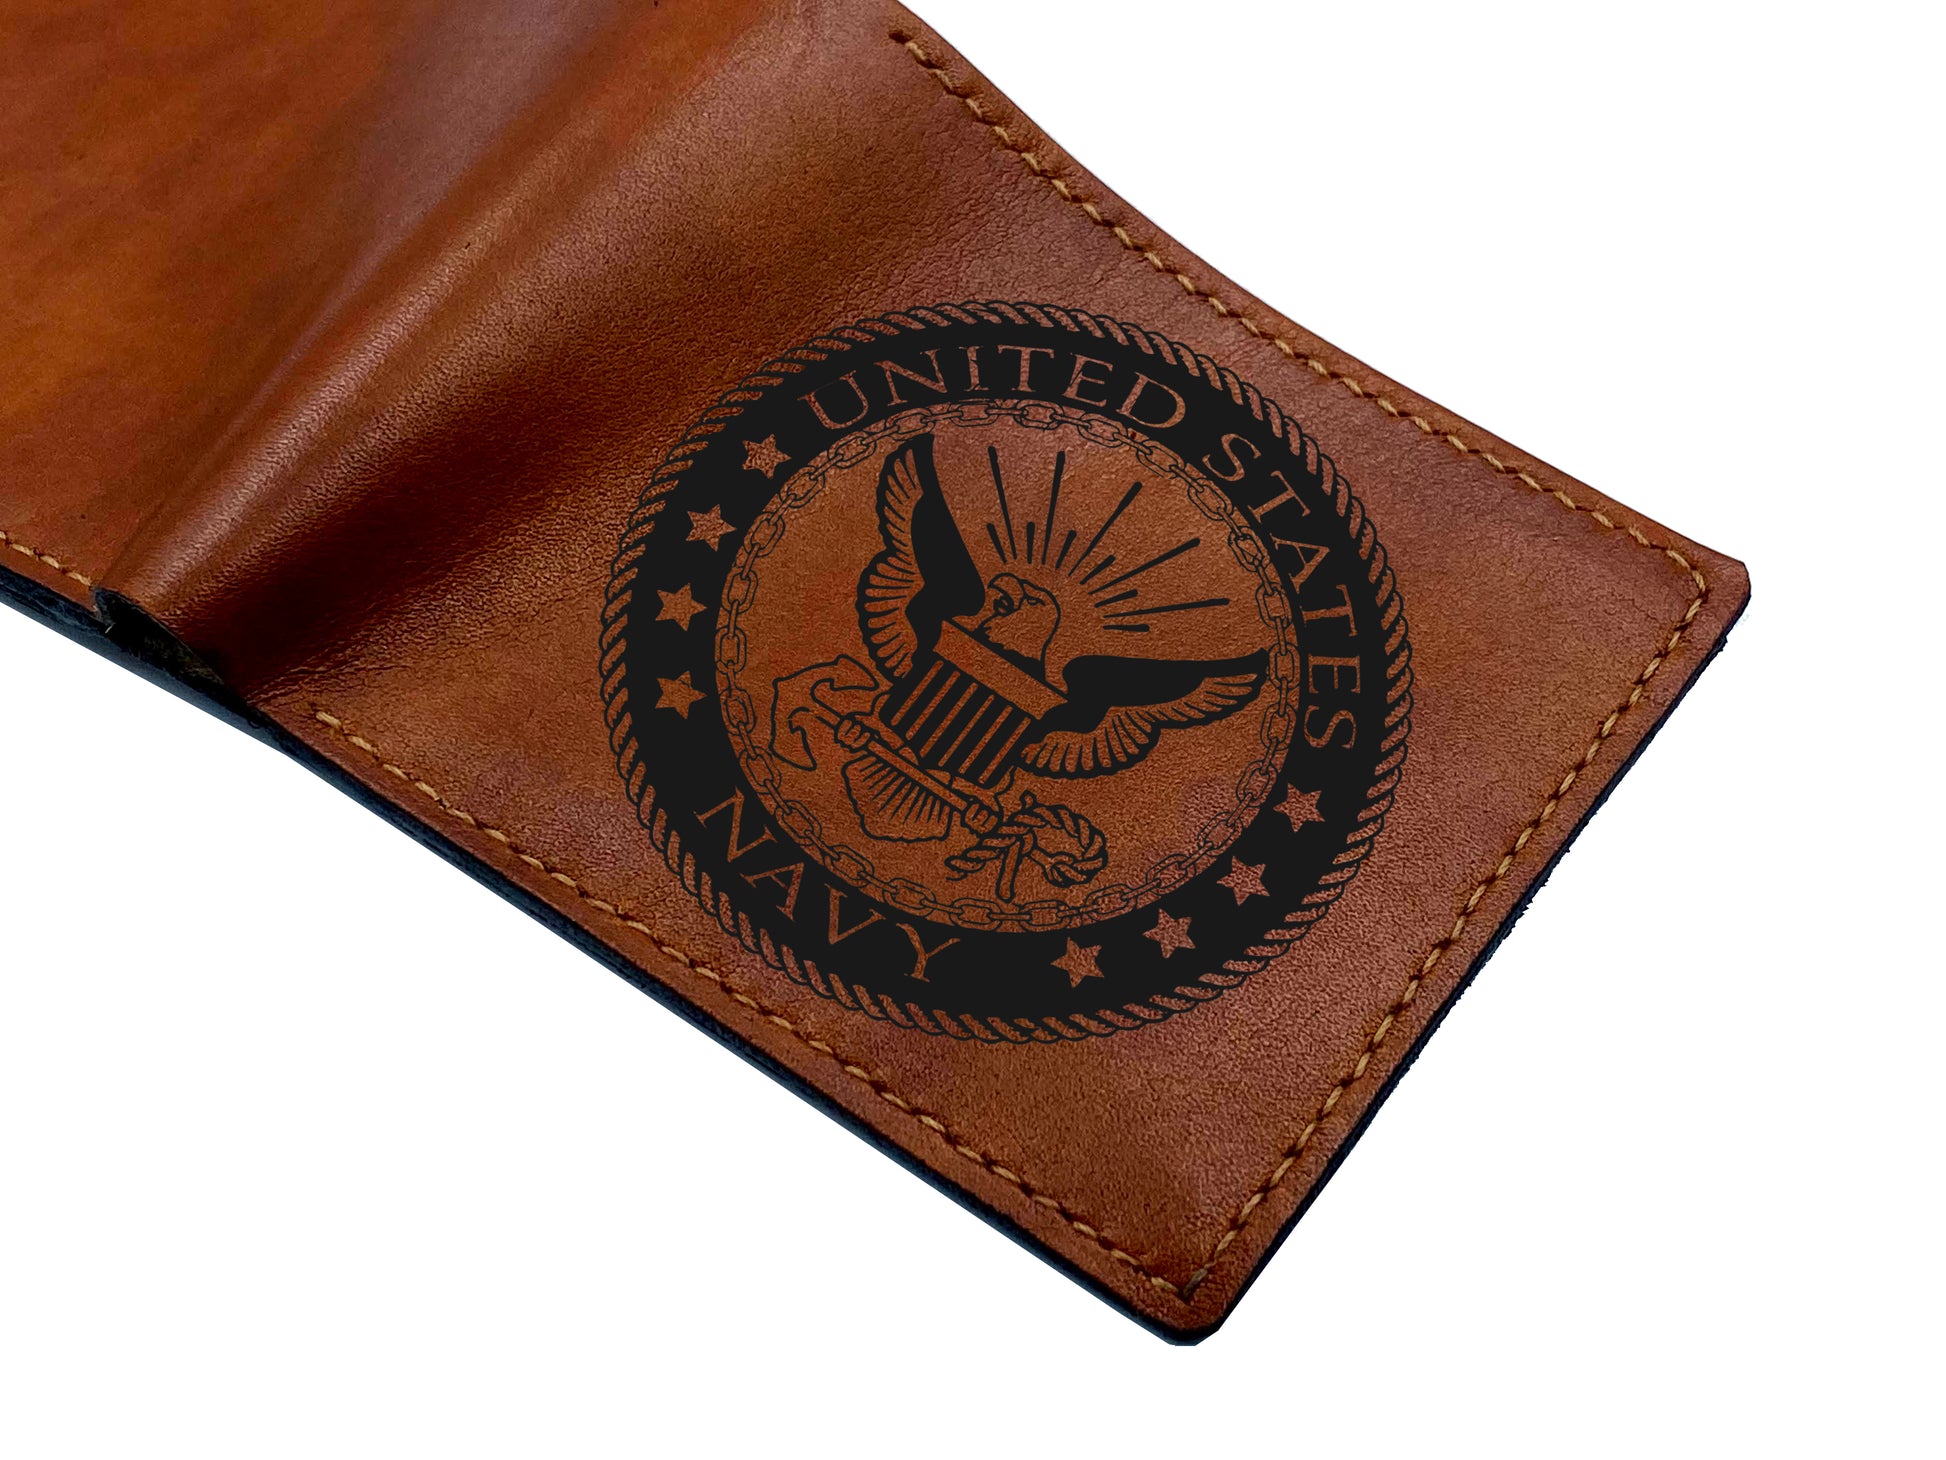 US navy logo leather wallet, custom military gift ideas for boyfriends, husband, Soldier present